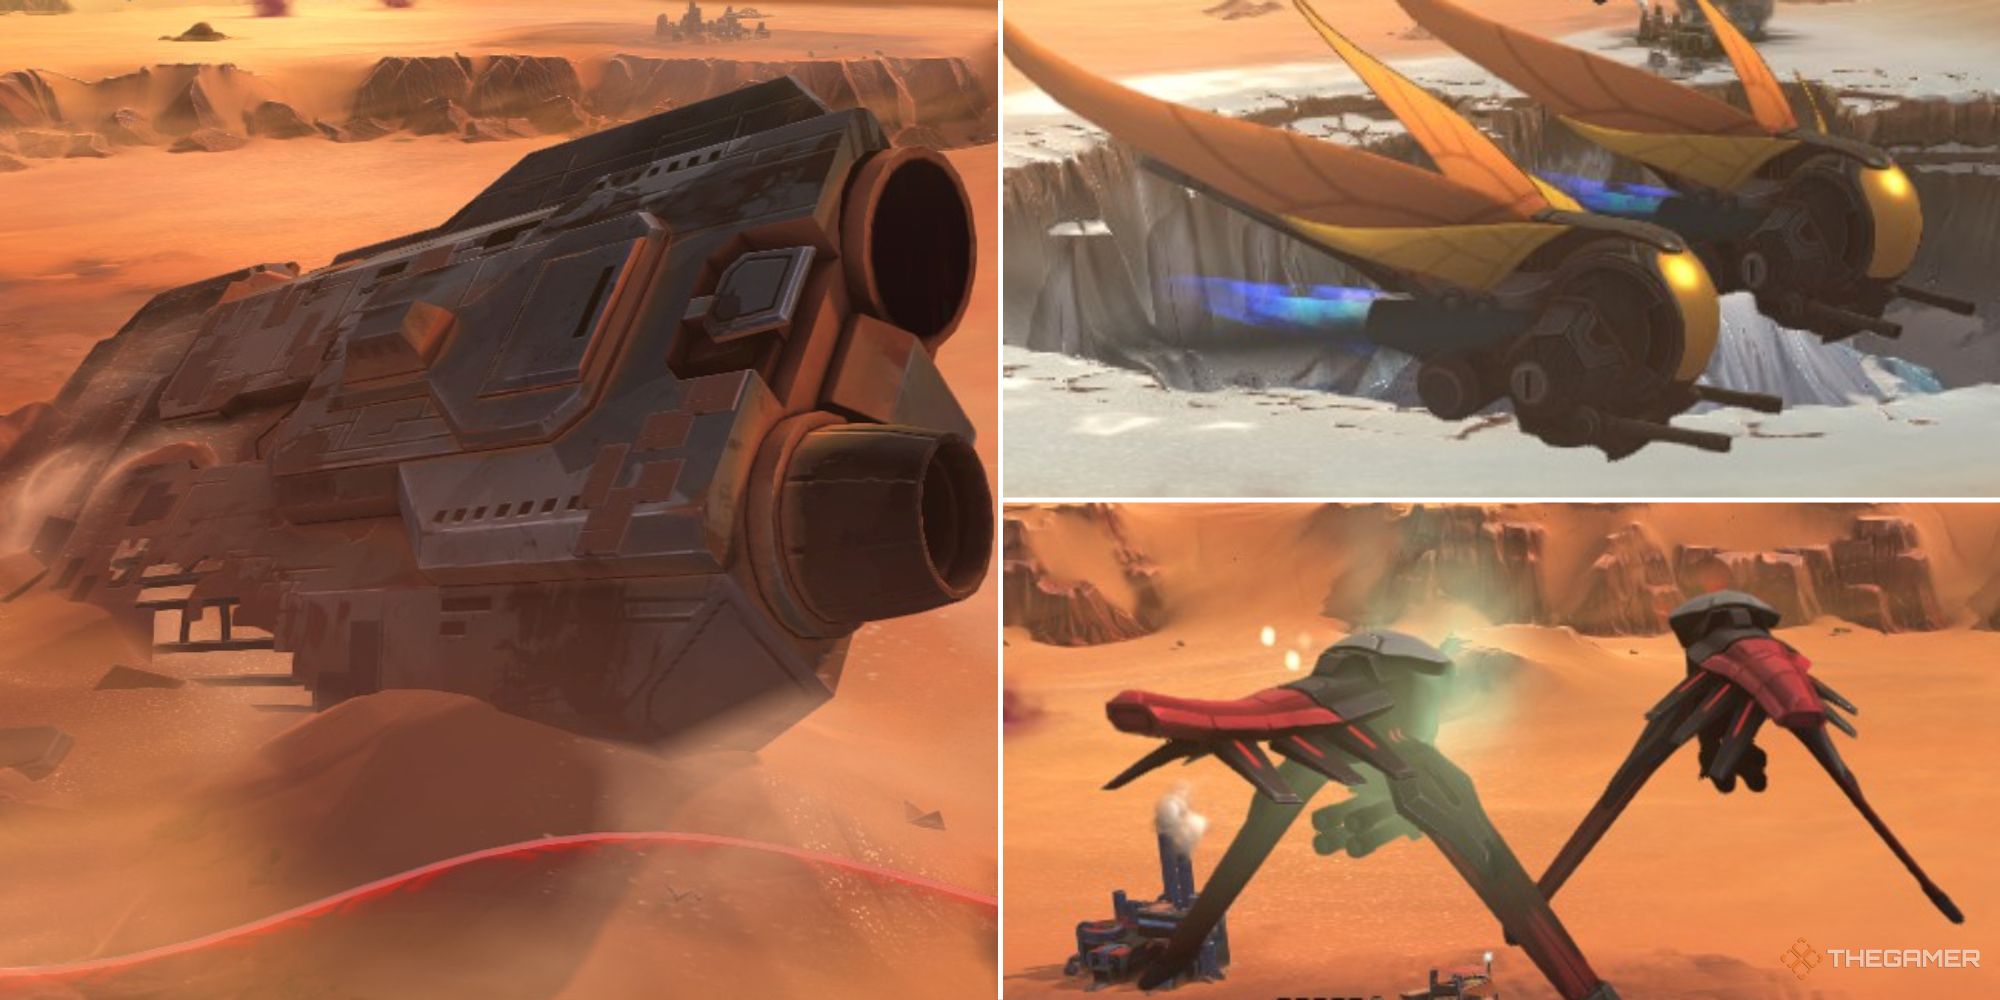 The crashed cruiser in Dune: Spice Wars, with Fremen and Harkonnen fighters